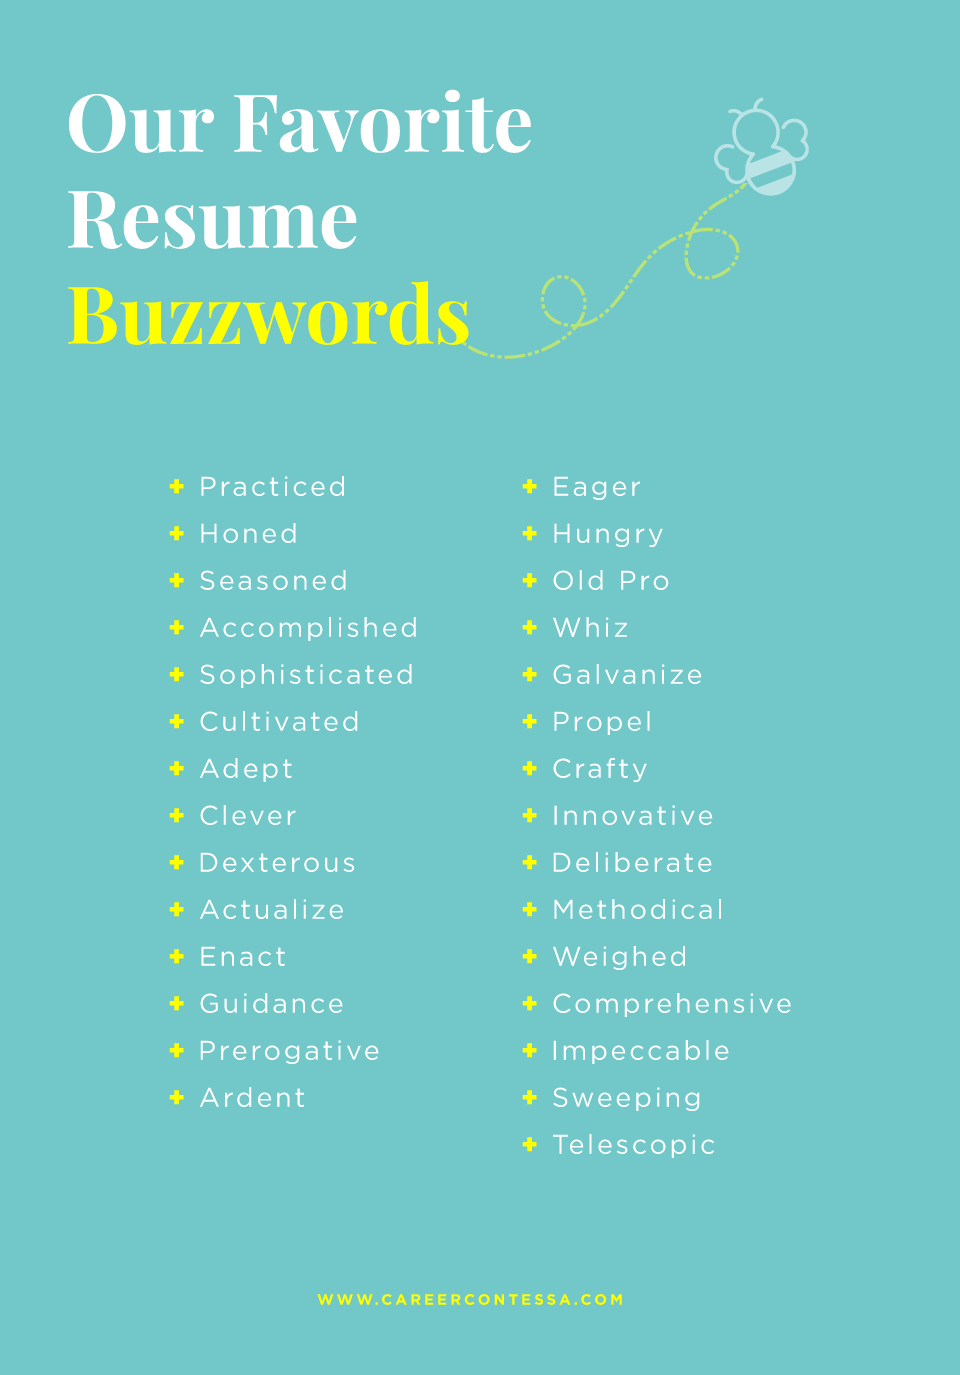 How To Use Resume Adjectives Effectively (With Words List